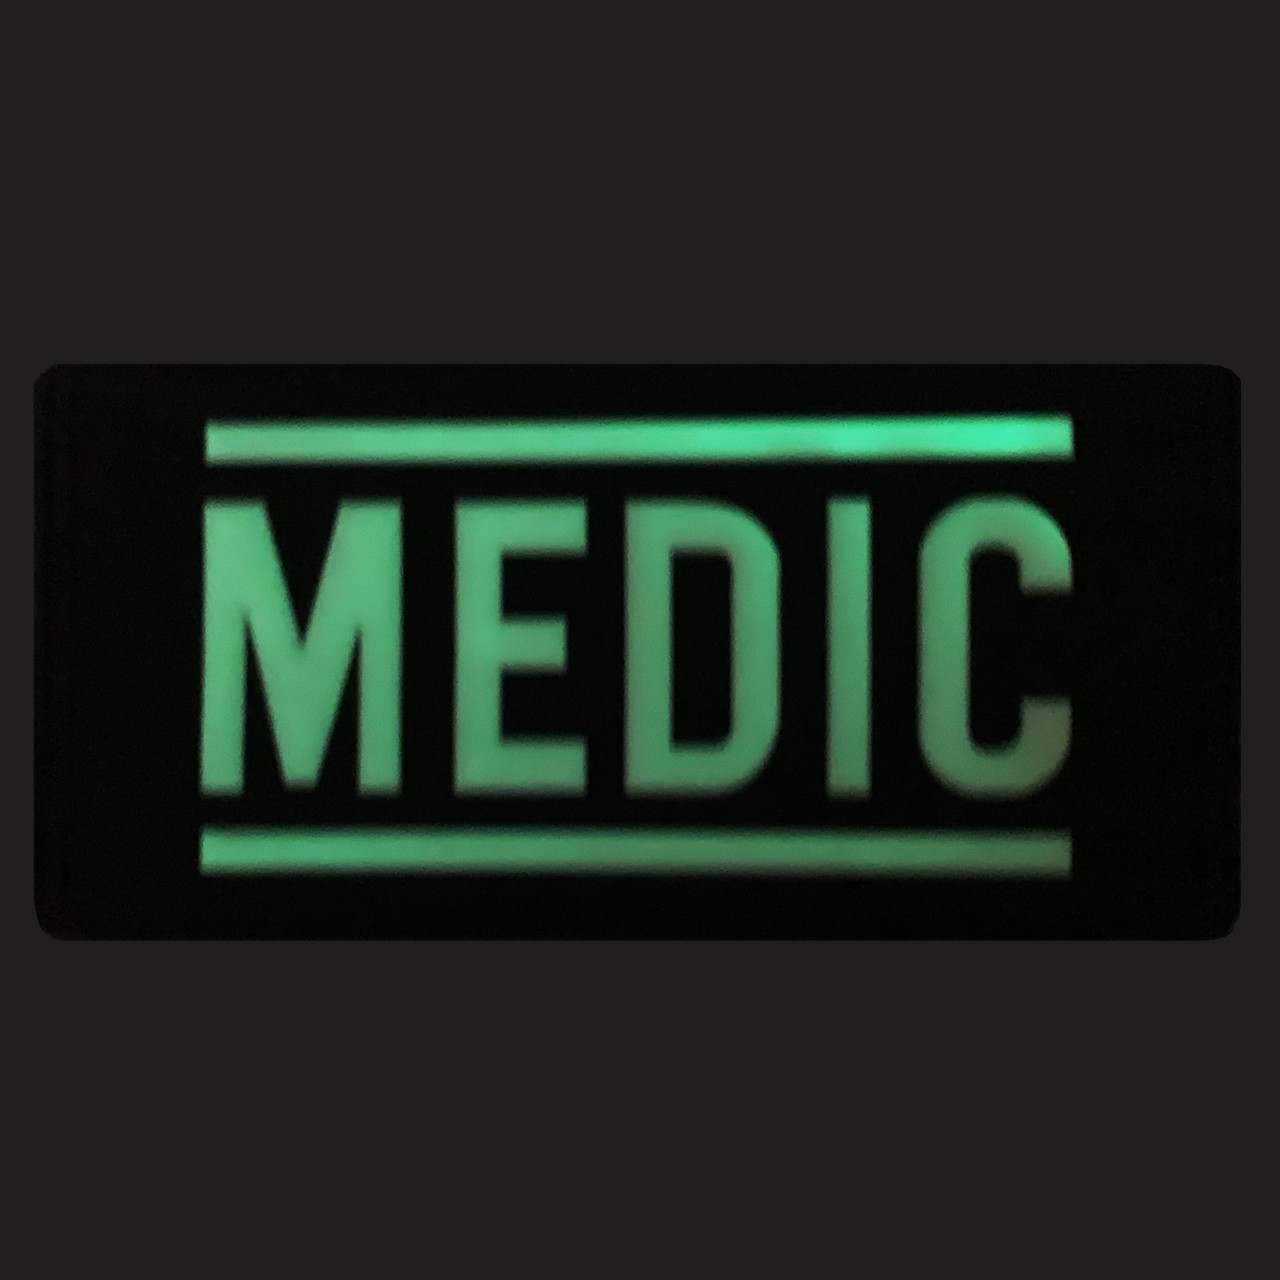 Medical Cross: Glow-In-The-Dark Patch 1.5x1.5